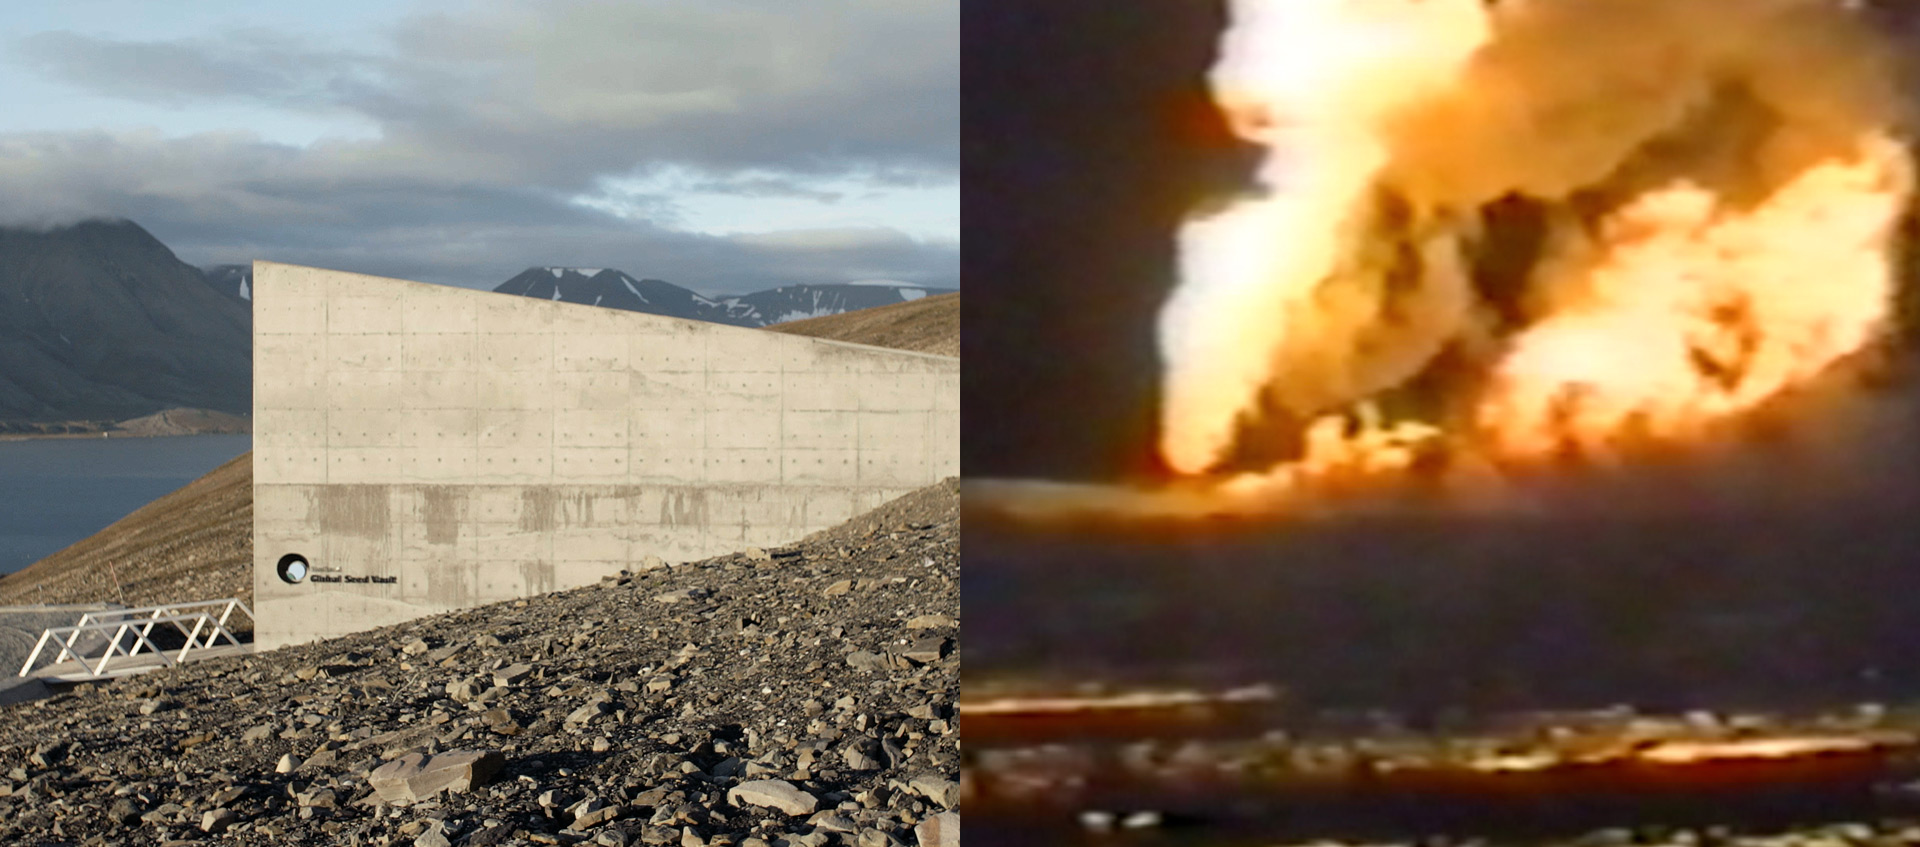 A split image with a still from Frank Heath's Midnight Sun on the left (featuring a view of the Svalbard Global Seed Vault's concrete exterior) and Monira Al Qadiri's Behind the Sun on the right (a view of burning oil fields in Kuwait)